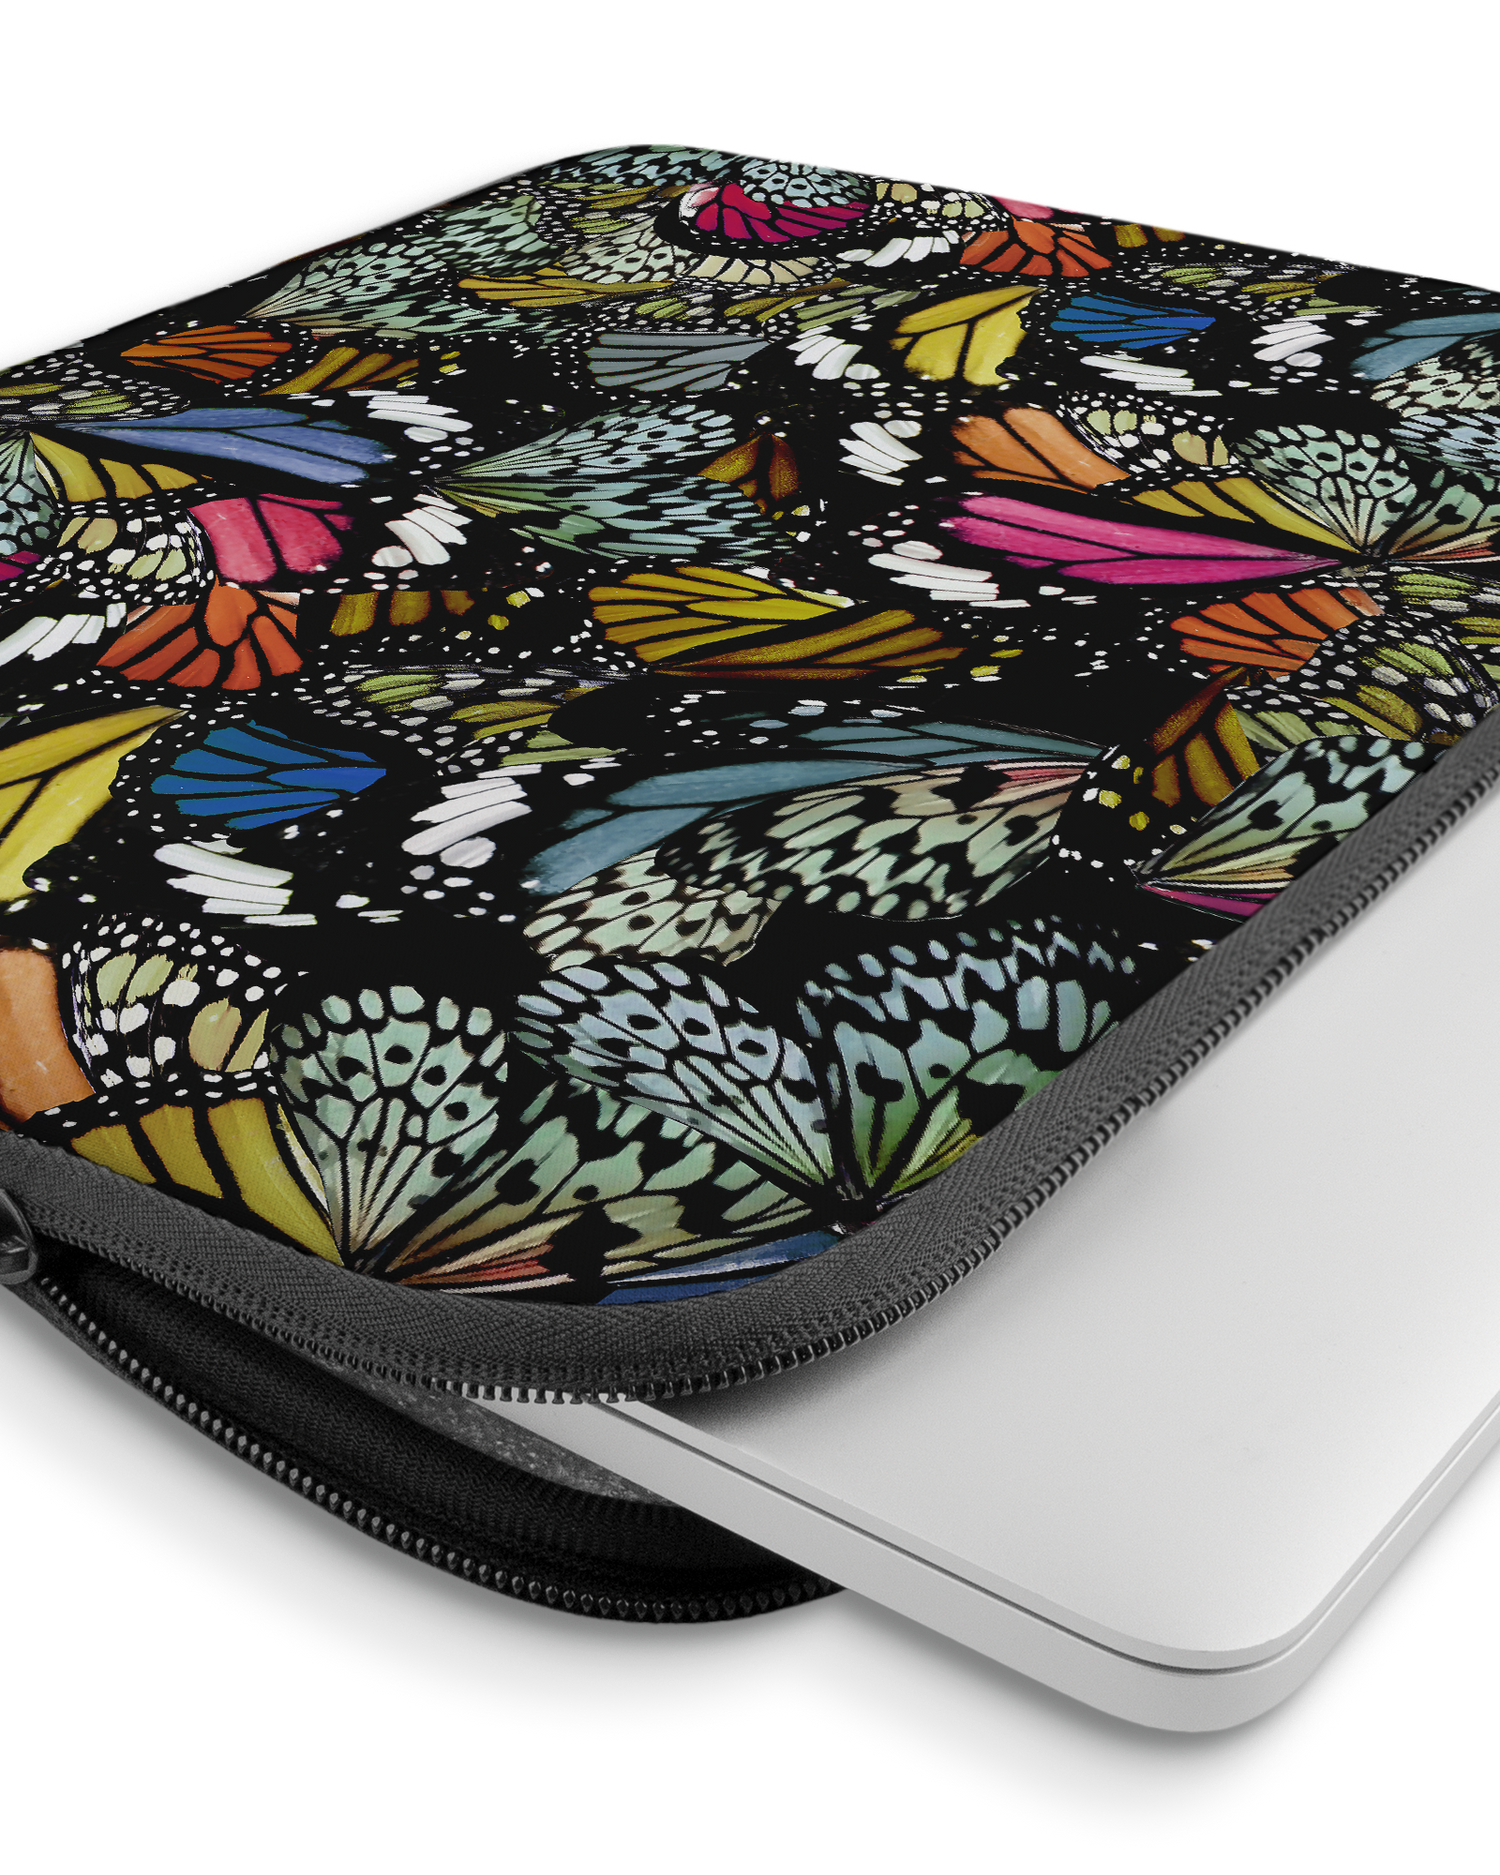 Psychedelic Butterflies Laptop Case 15 inch with device inside